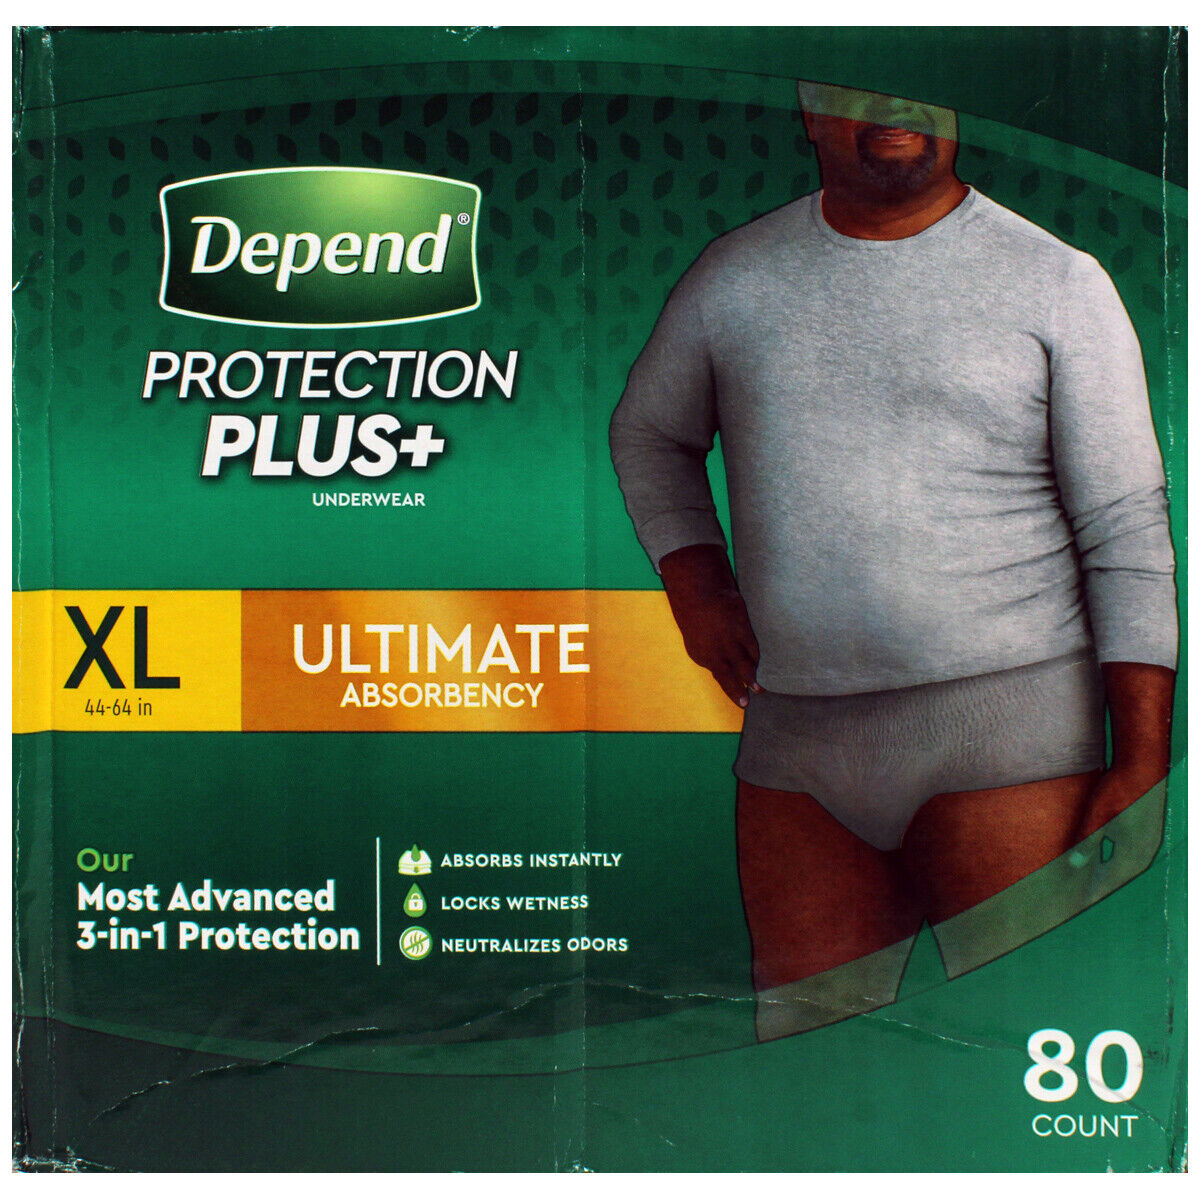 Depend Protection Plus Ultimate Underwear for Men, X-Large, 80 Count  36000523799 | eBay